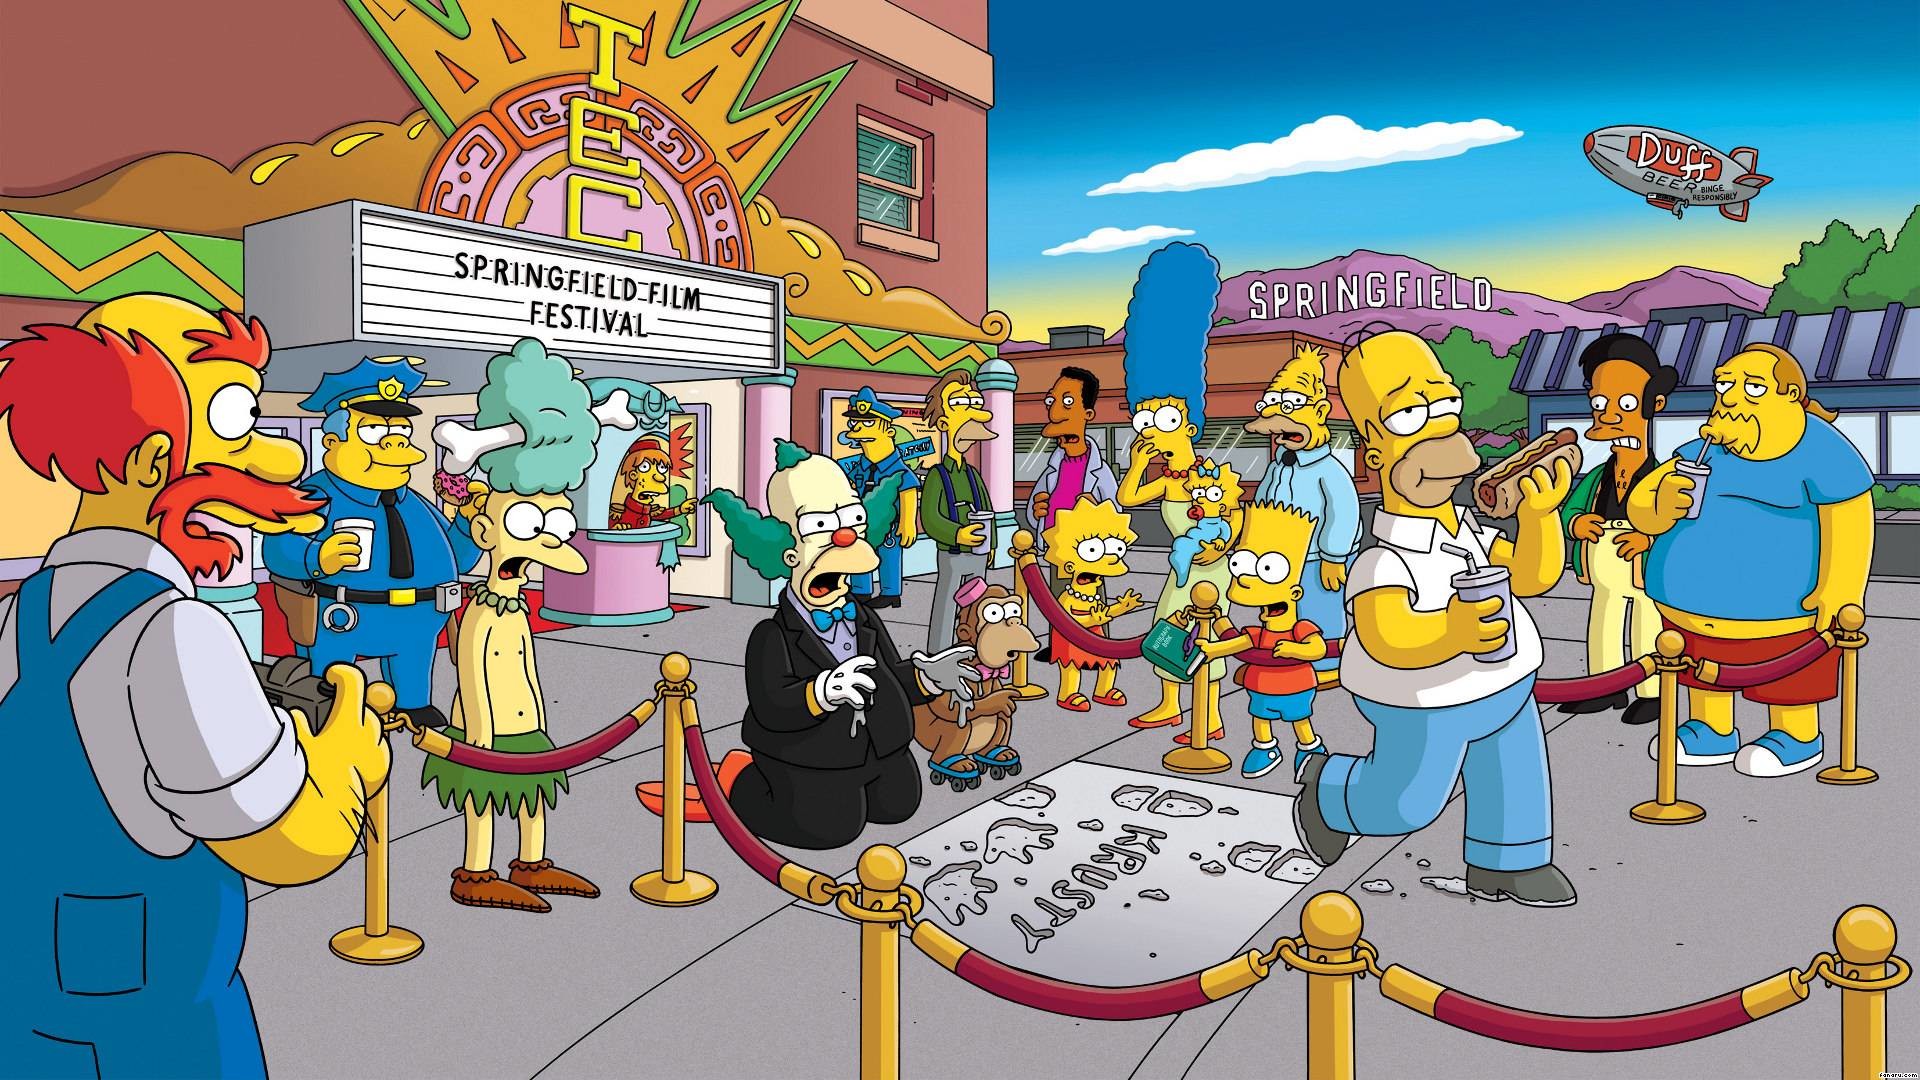 1920x1080 The Simpsons HD Wallpapers Backgrounds Wallpaper 1920Ã1200 The Simpsons  Wallpaper (45 Wallpapers)